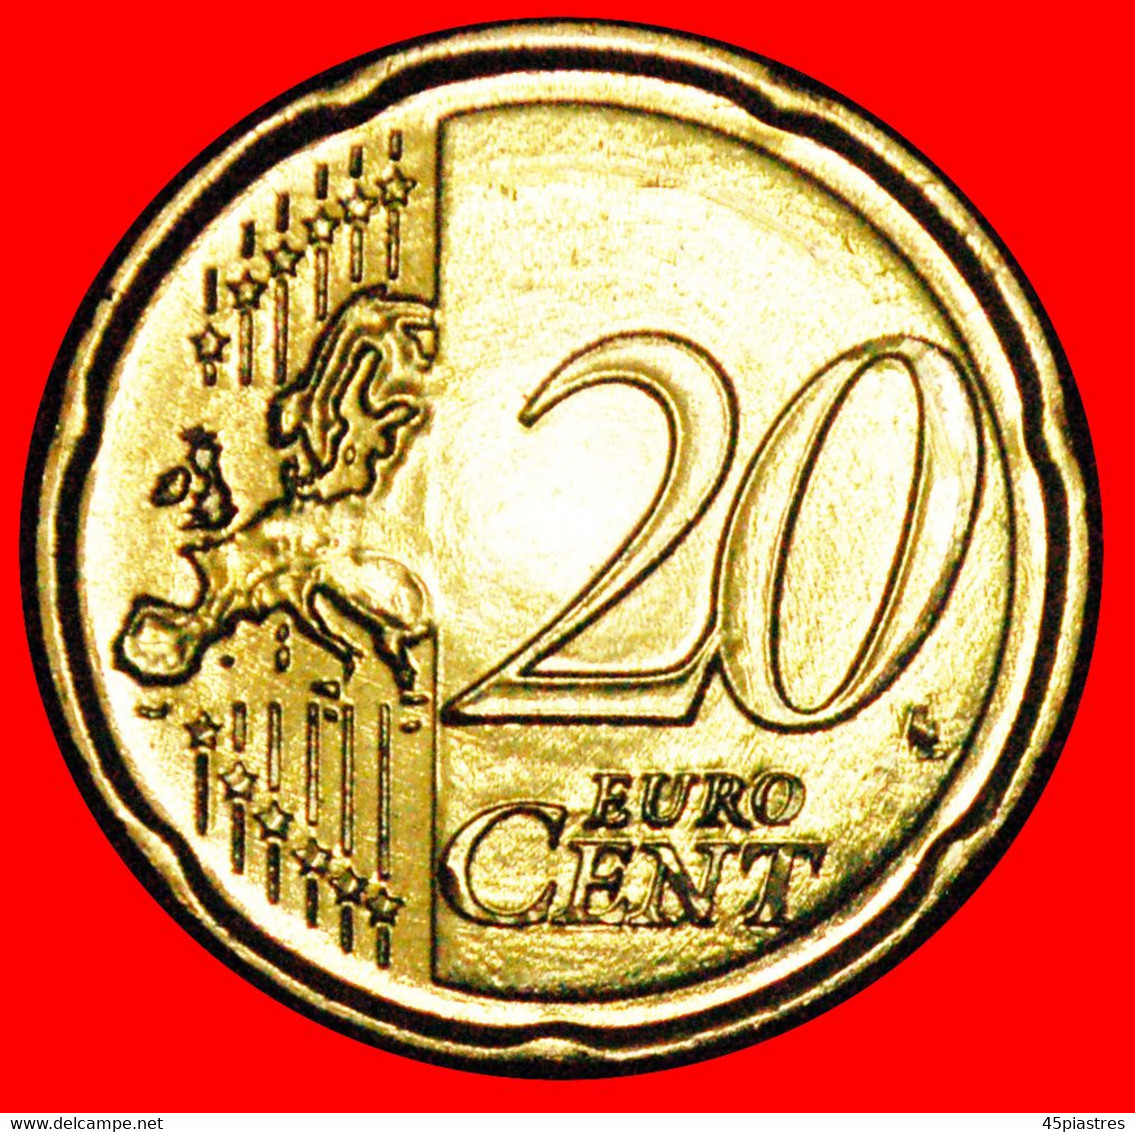 * GREECE (2008-2022): CYPRUS  20 CENT 2012 NORDIC GOLD UNC MINT LUSTRE! UNCOMMON YEAR!  LOW START  NO RESERVE! - Cyprus